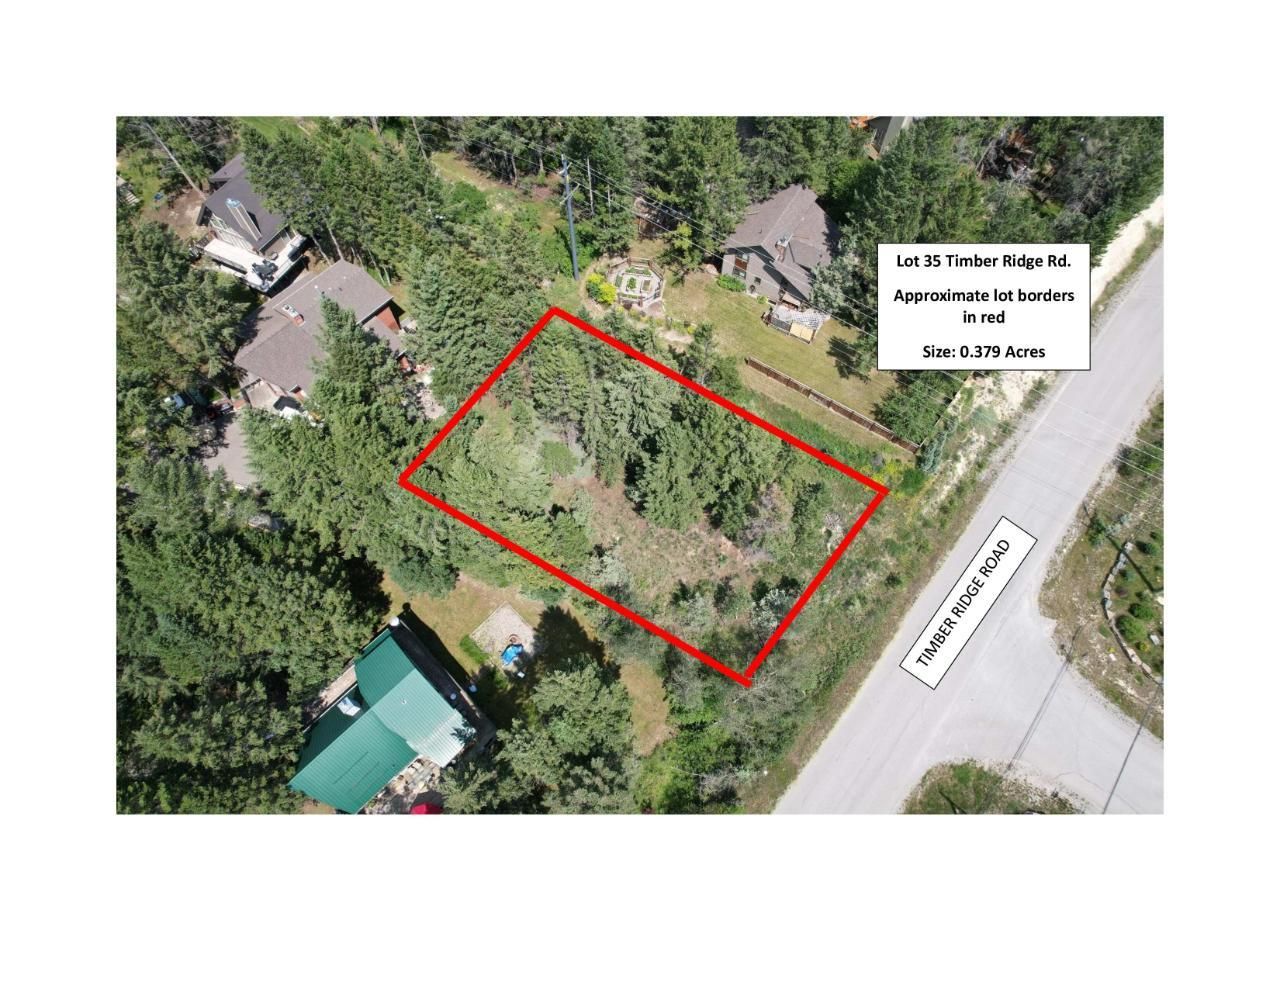 Main Photo: Lot 35 TIMBER RIDGE ROAD in Windermere: Vacant Land for sale : MLS®# 2472037